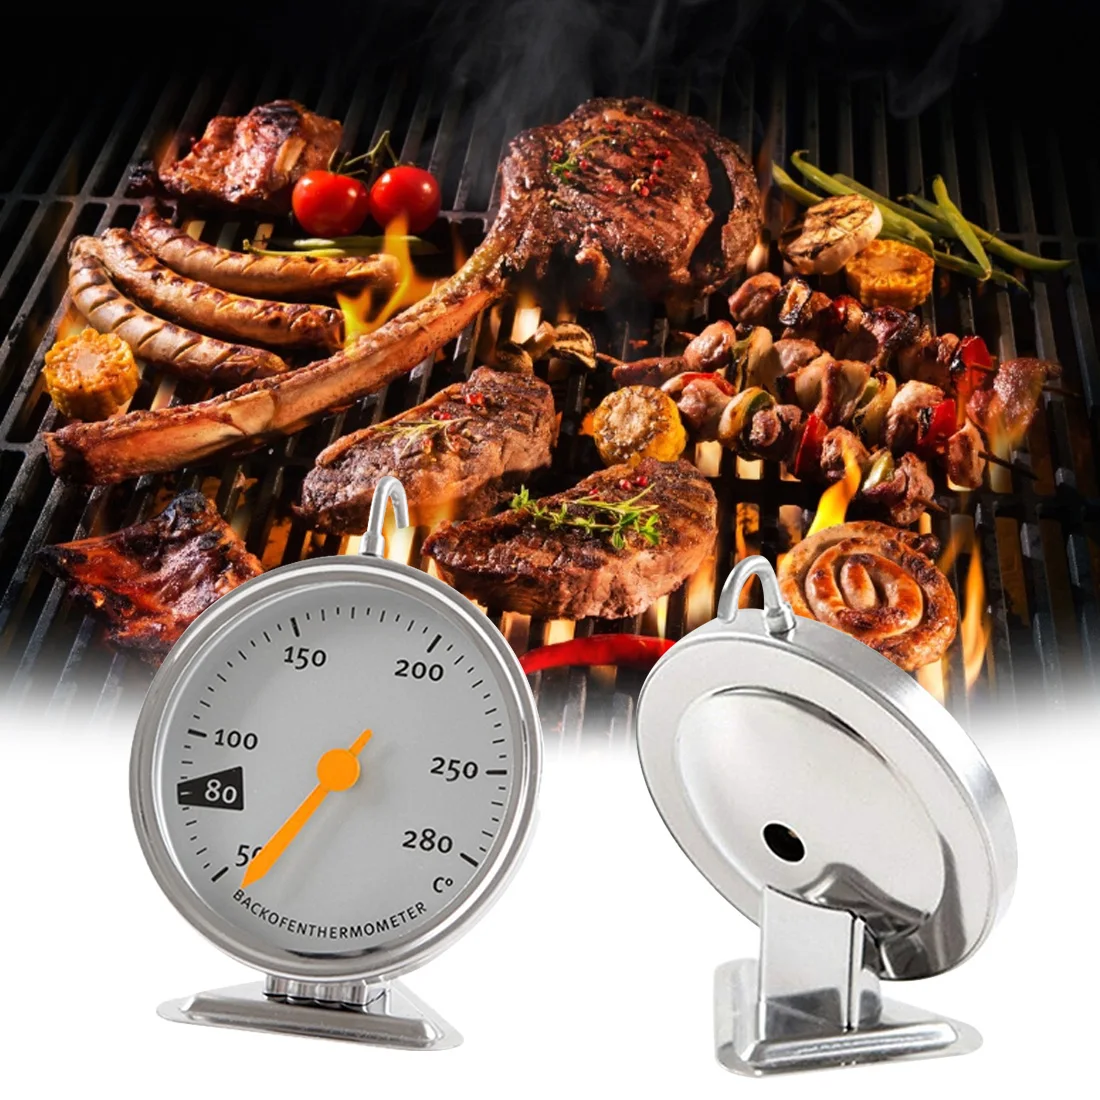 Special high temperature oven thermometer 50-280 degrees Celsius mechanical baking oven thermometer oven special toaster